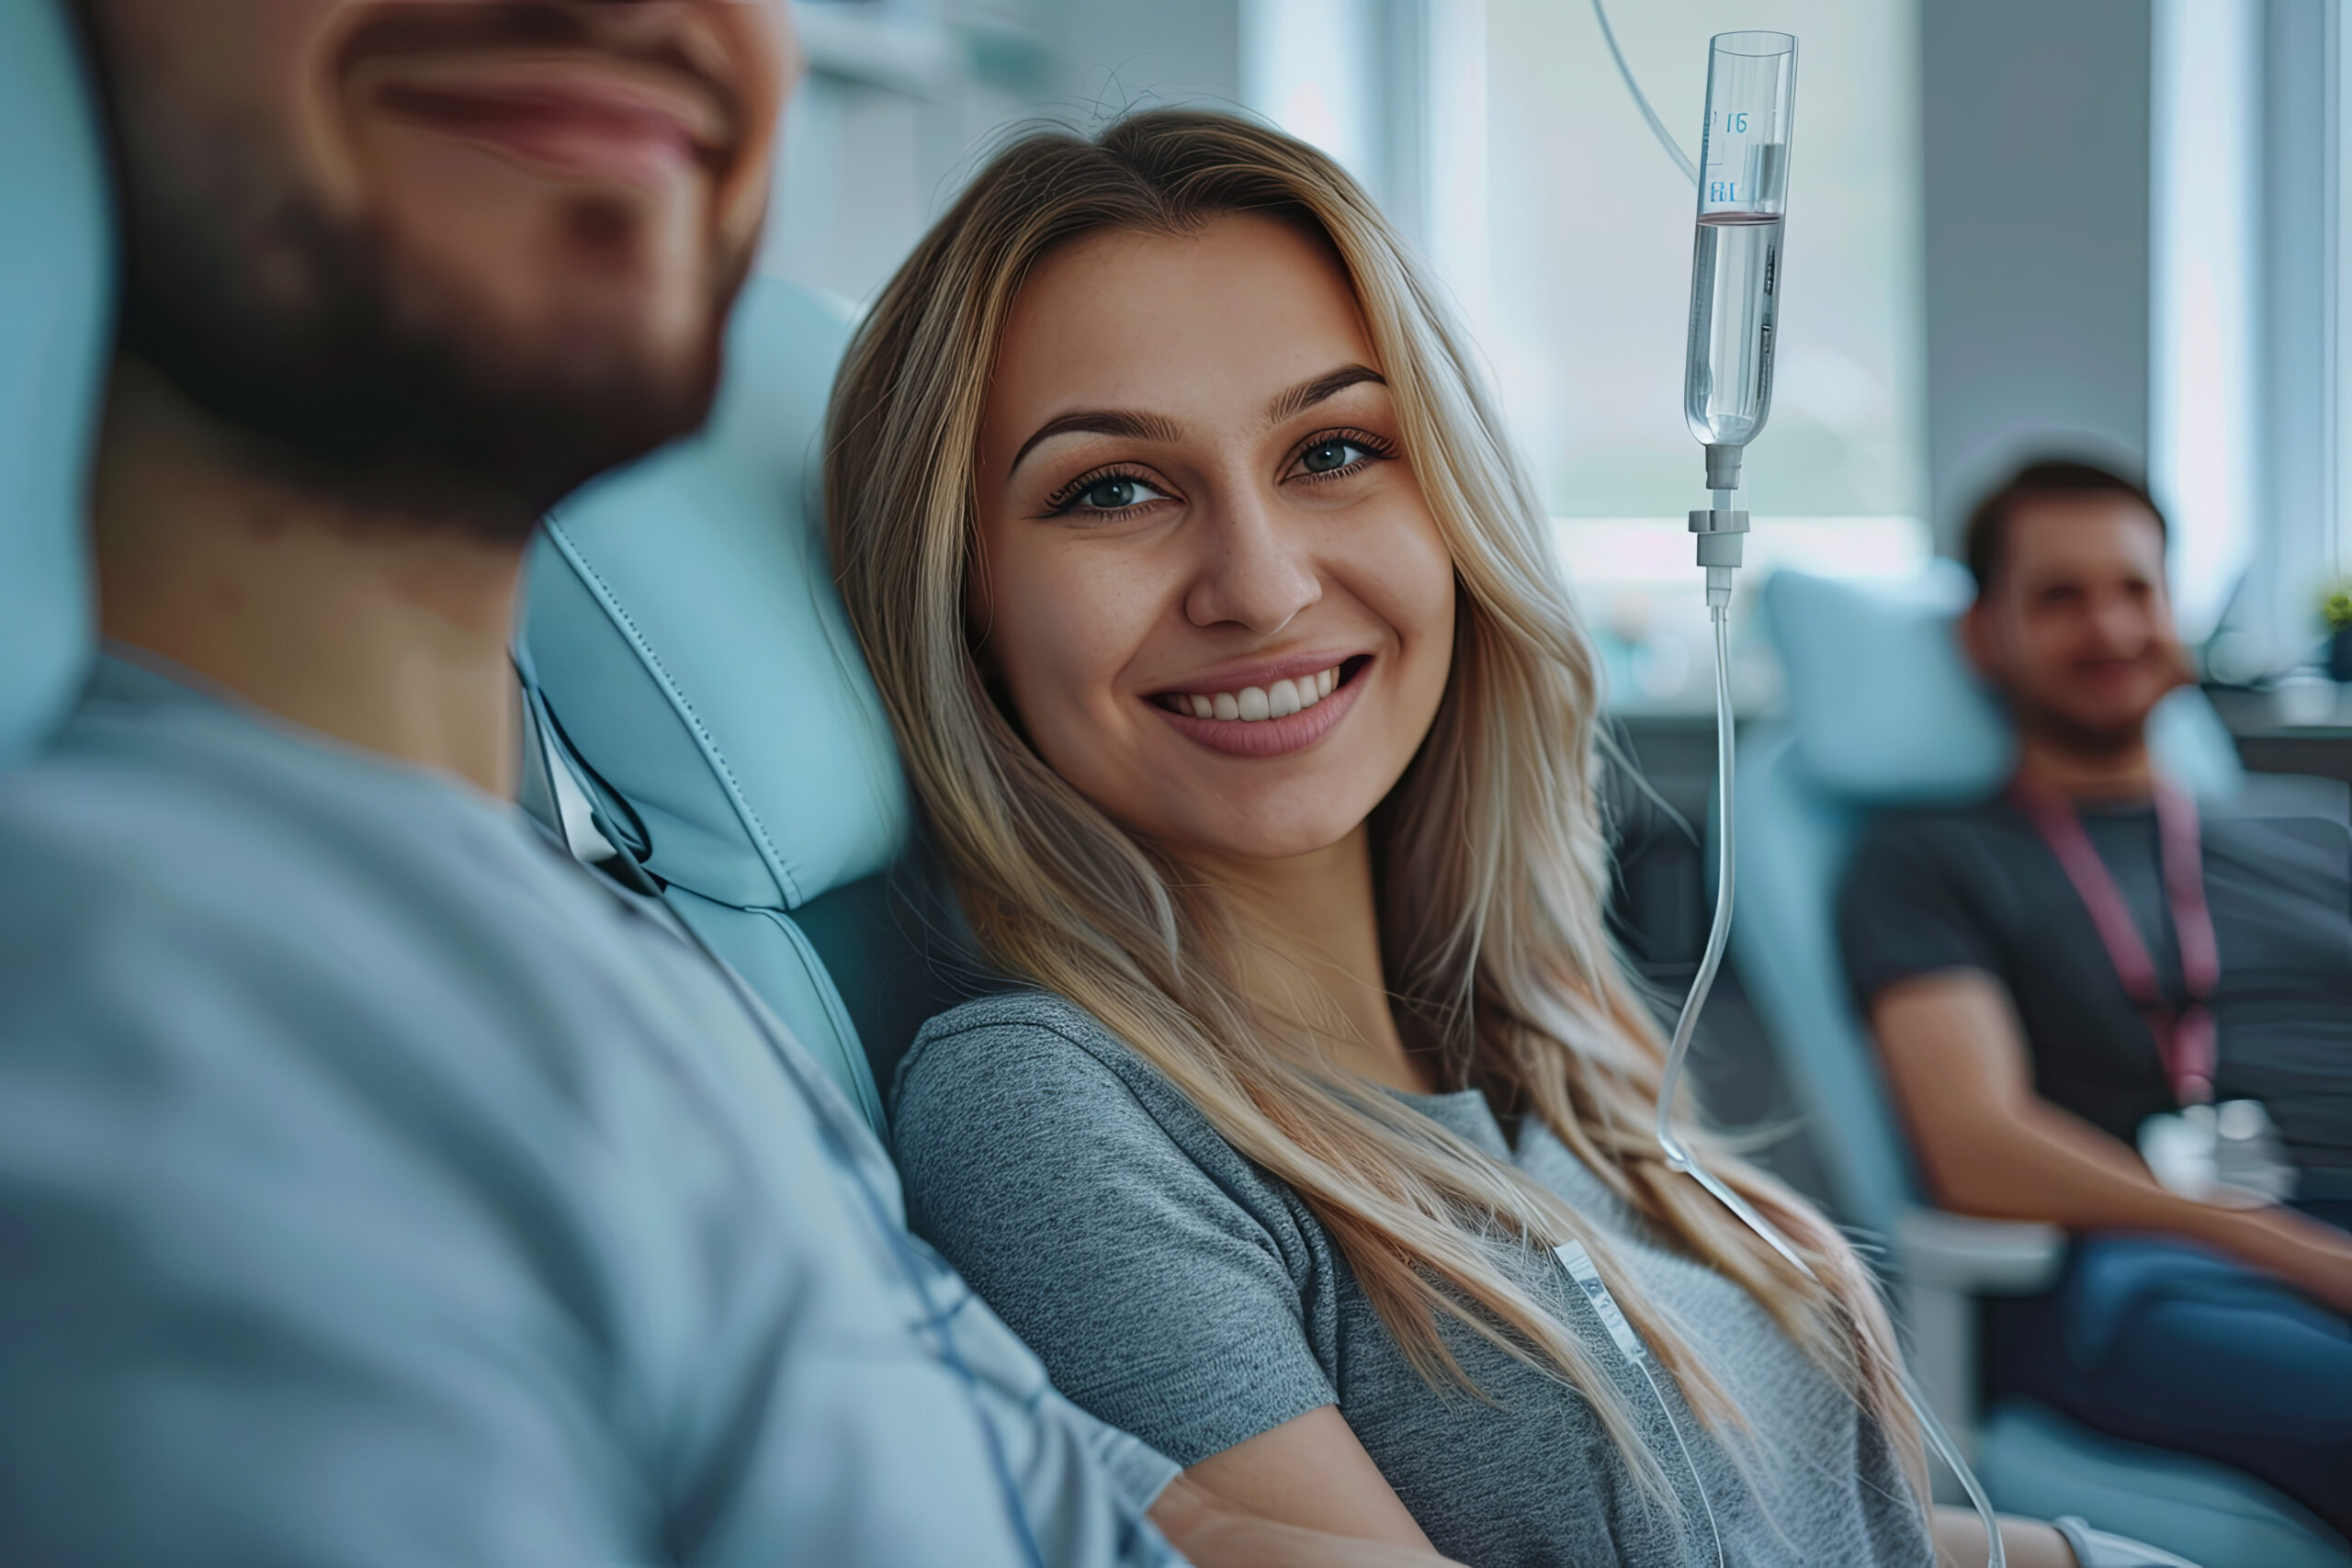 Maintenance and restoration of human immune system with vitamin IV infusion therapy. Beautiful woman with her boyfriend in modern wellness center during intravenous vitamin therapy